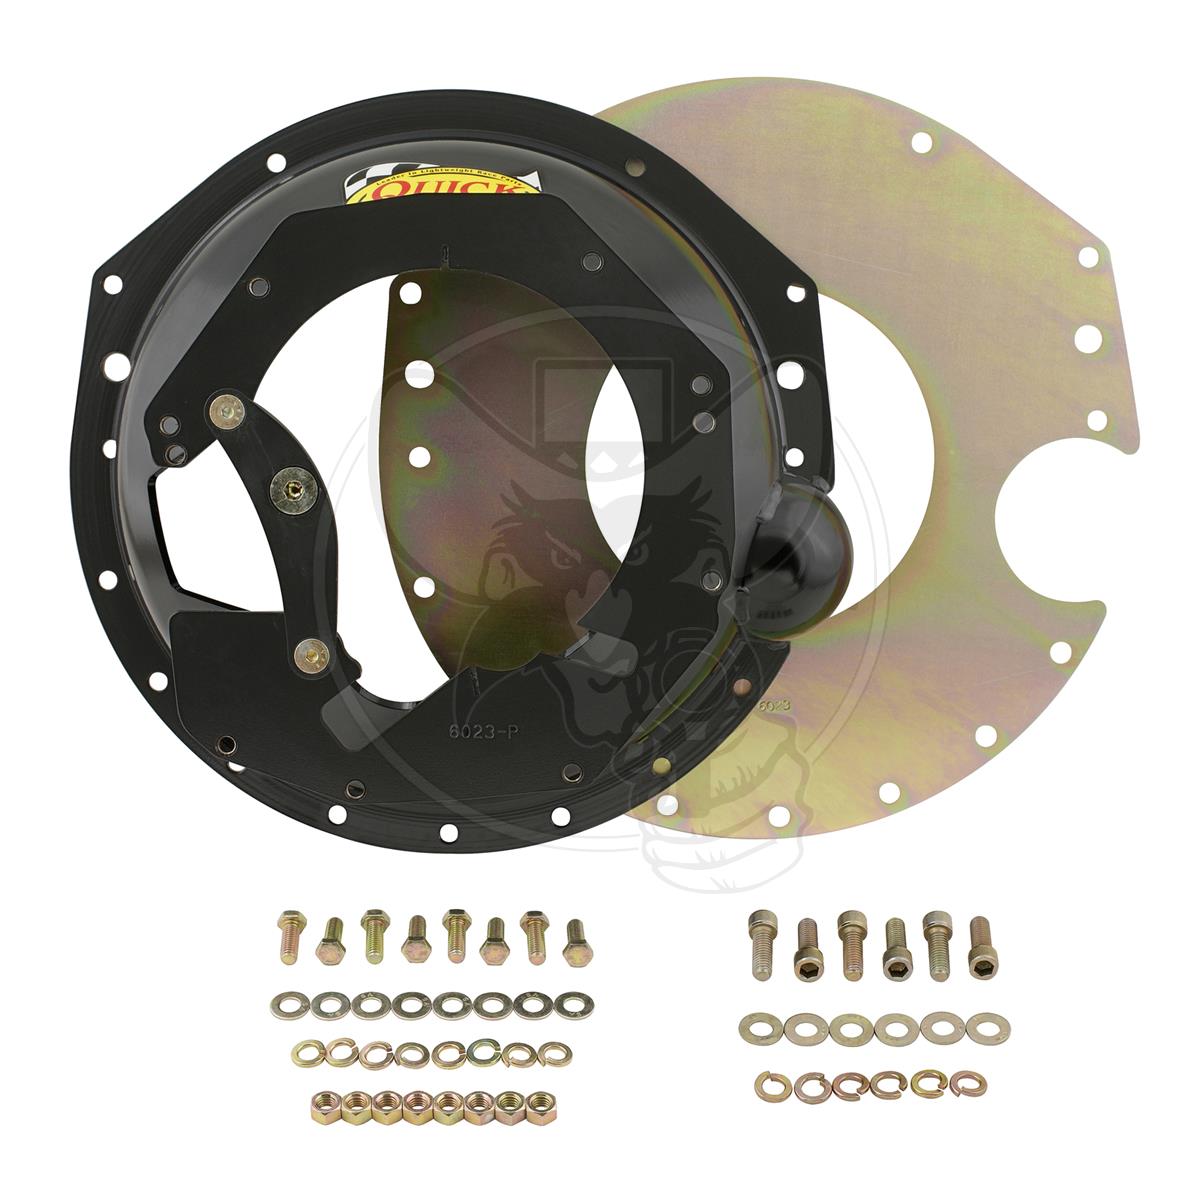 QTRM-6064 - QUICK TIME BELLHOUSING QUICK TIME SFI APPROVED FITS CHEVY ...